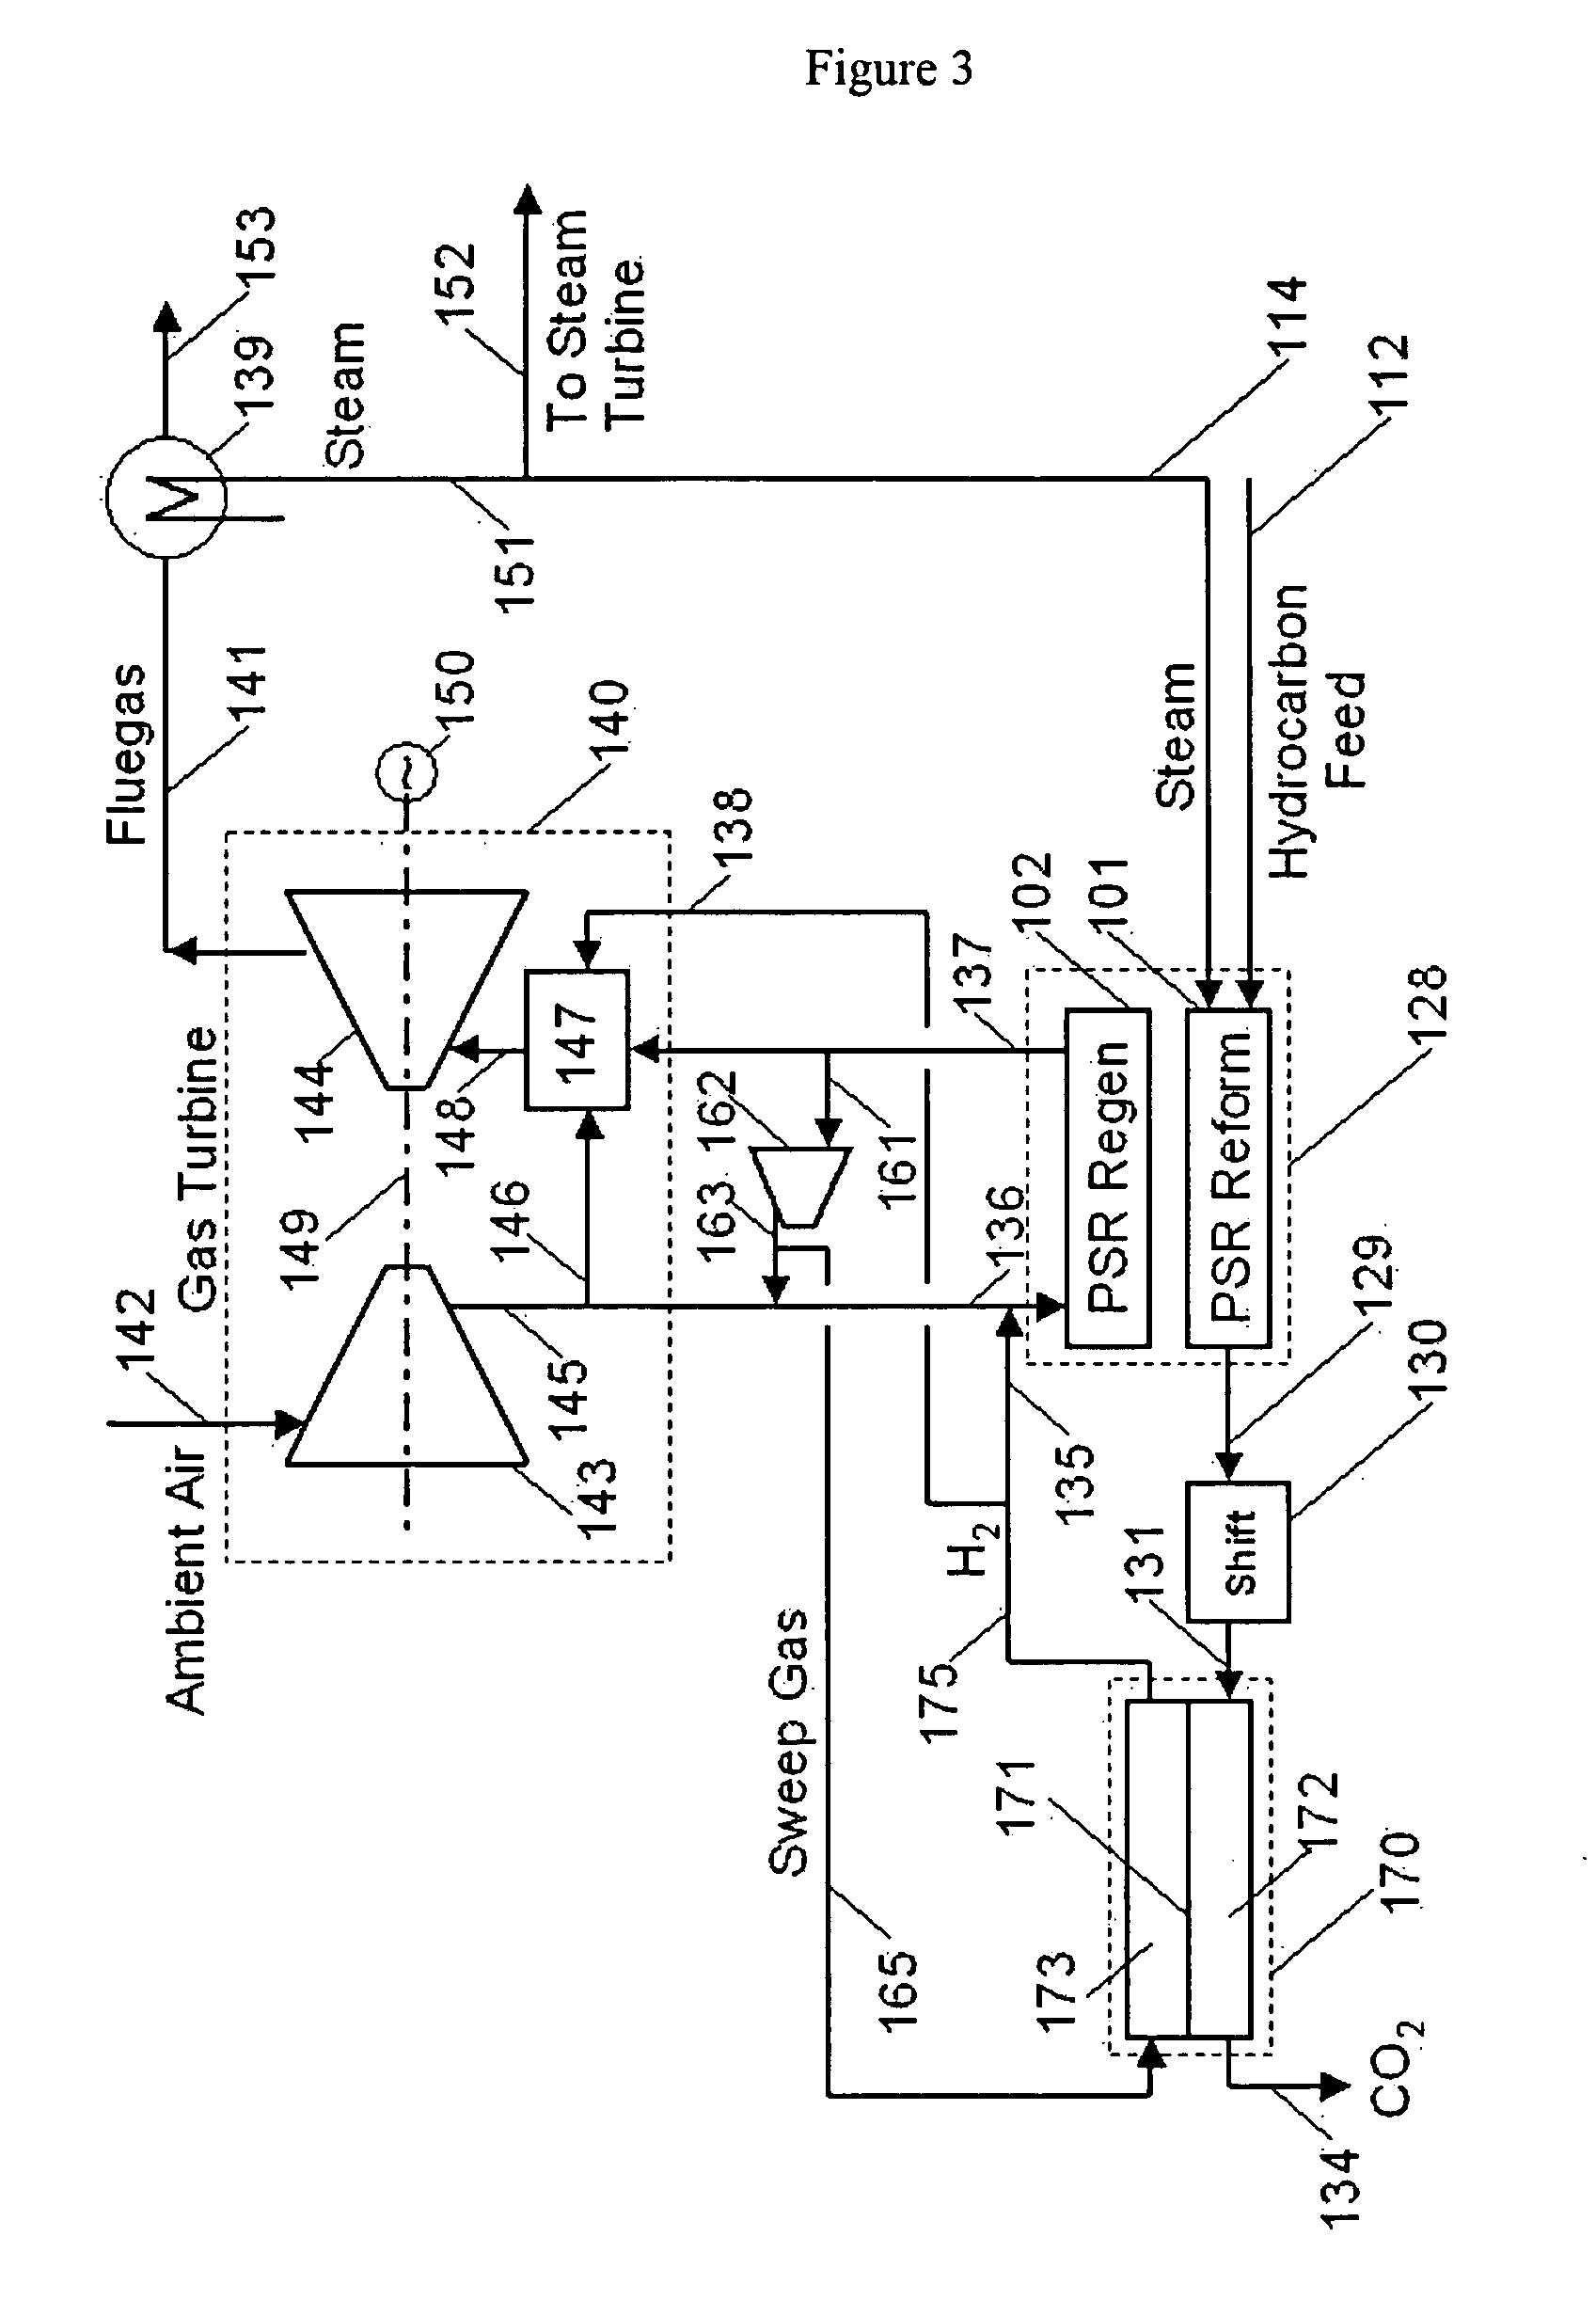 Integration of hydrogen and power generation using pressure swing reforming